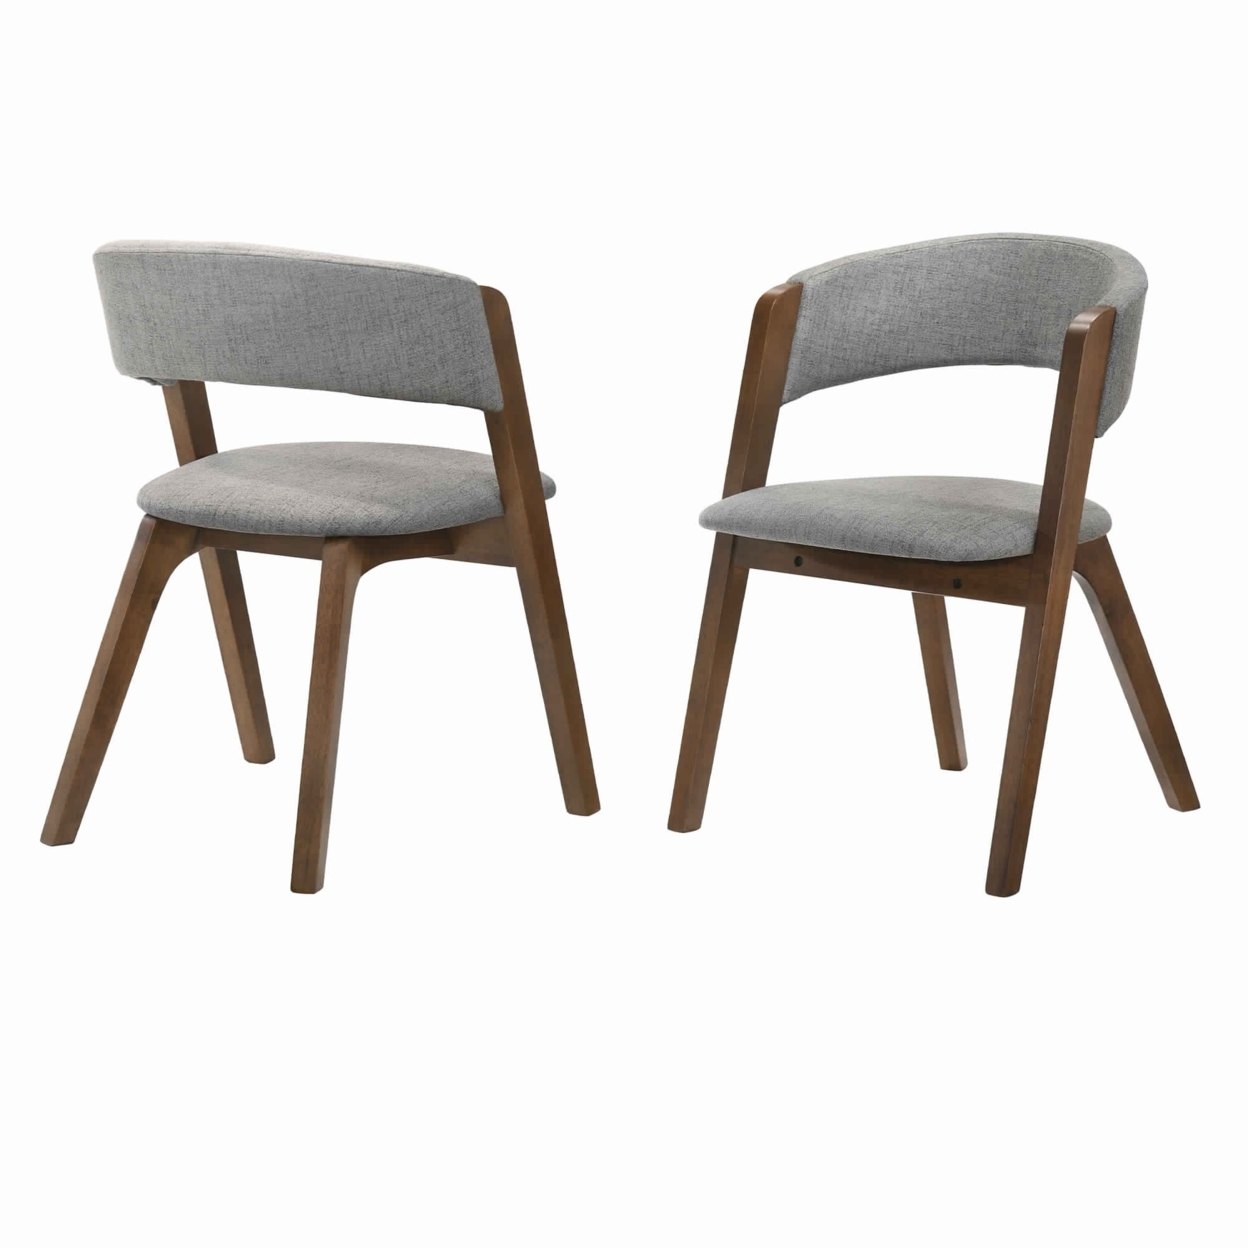 Fabric Upholstered Round Back Wood Dining Chair, Set Of 2, Brown And Gray- Saltoro Sherpi